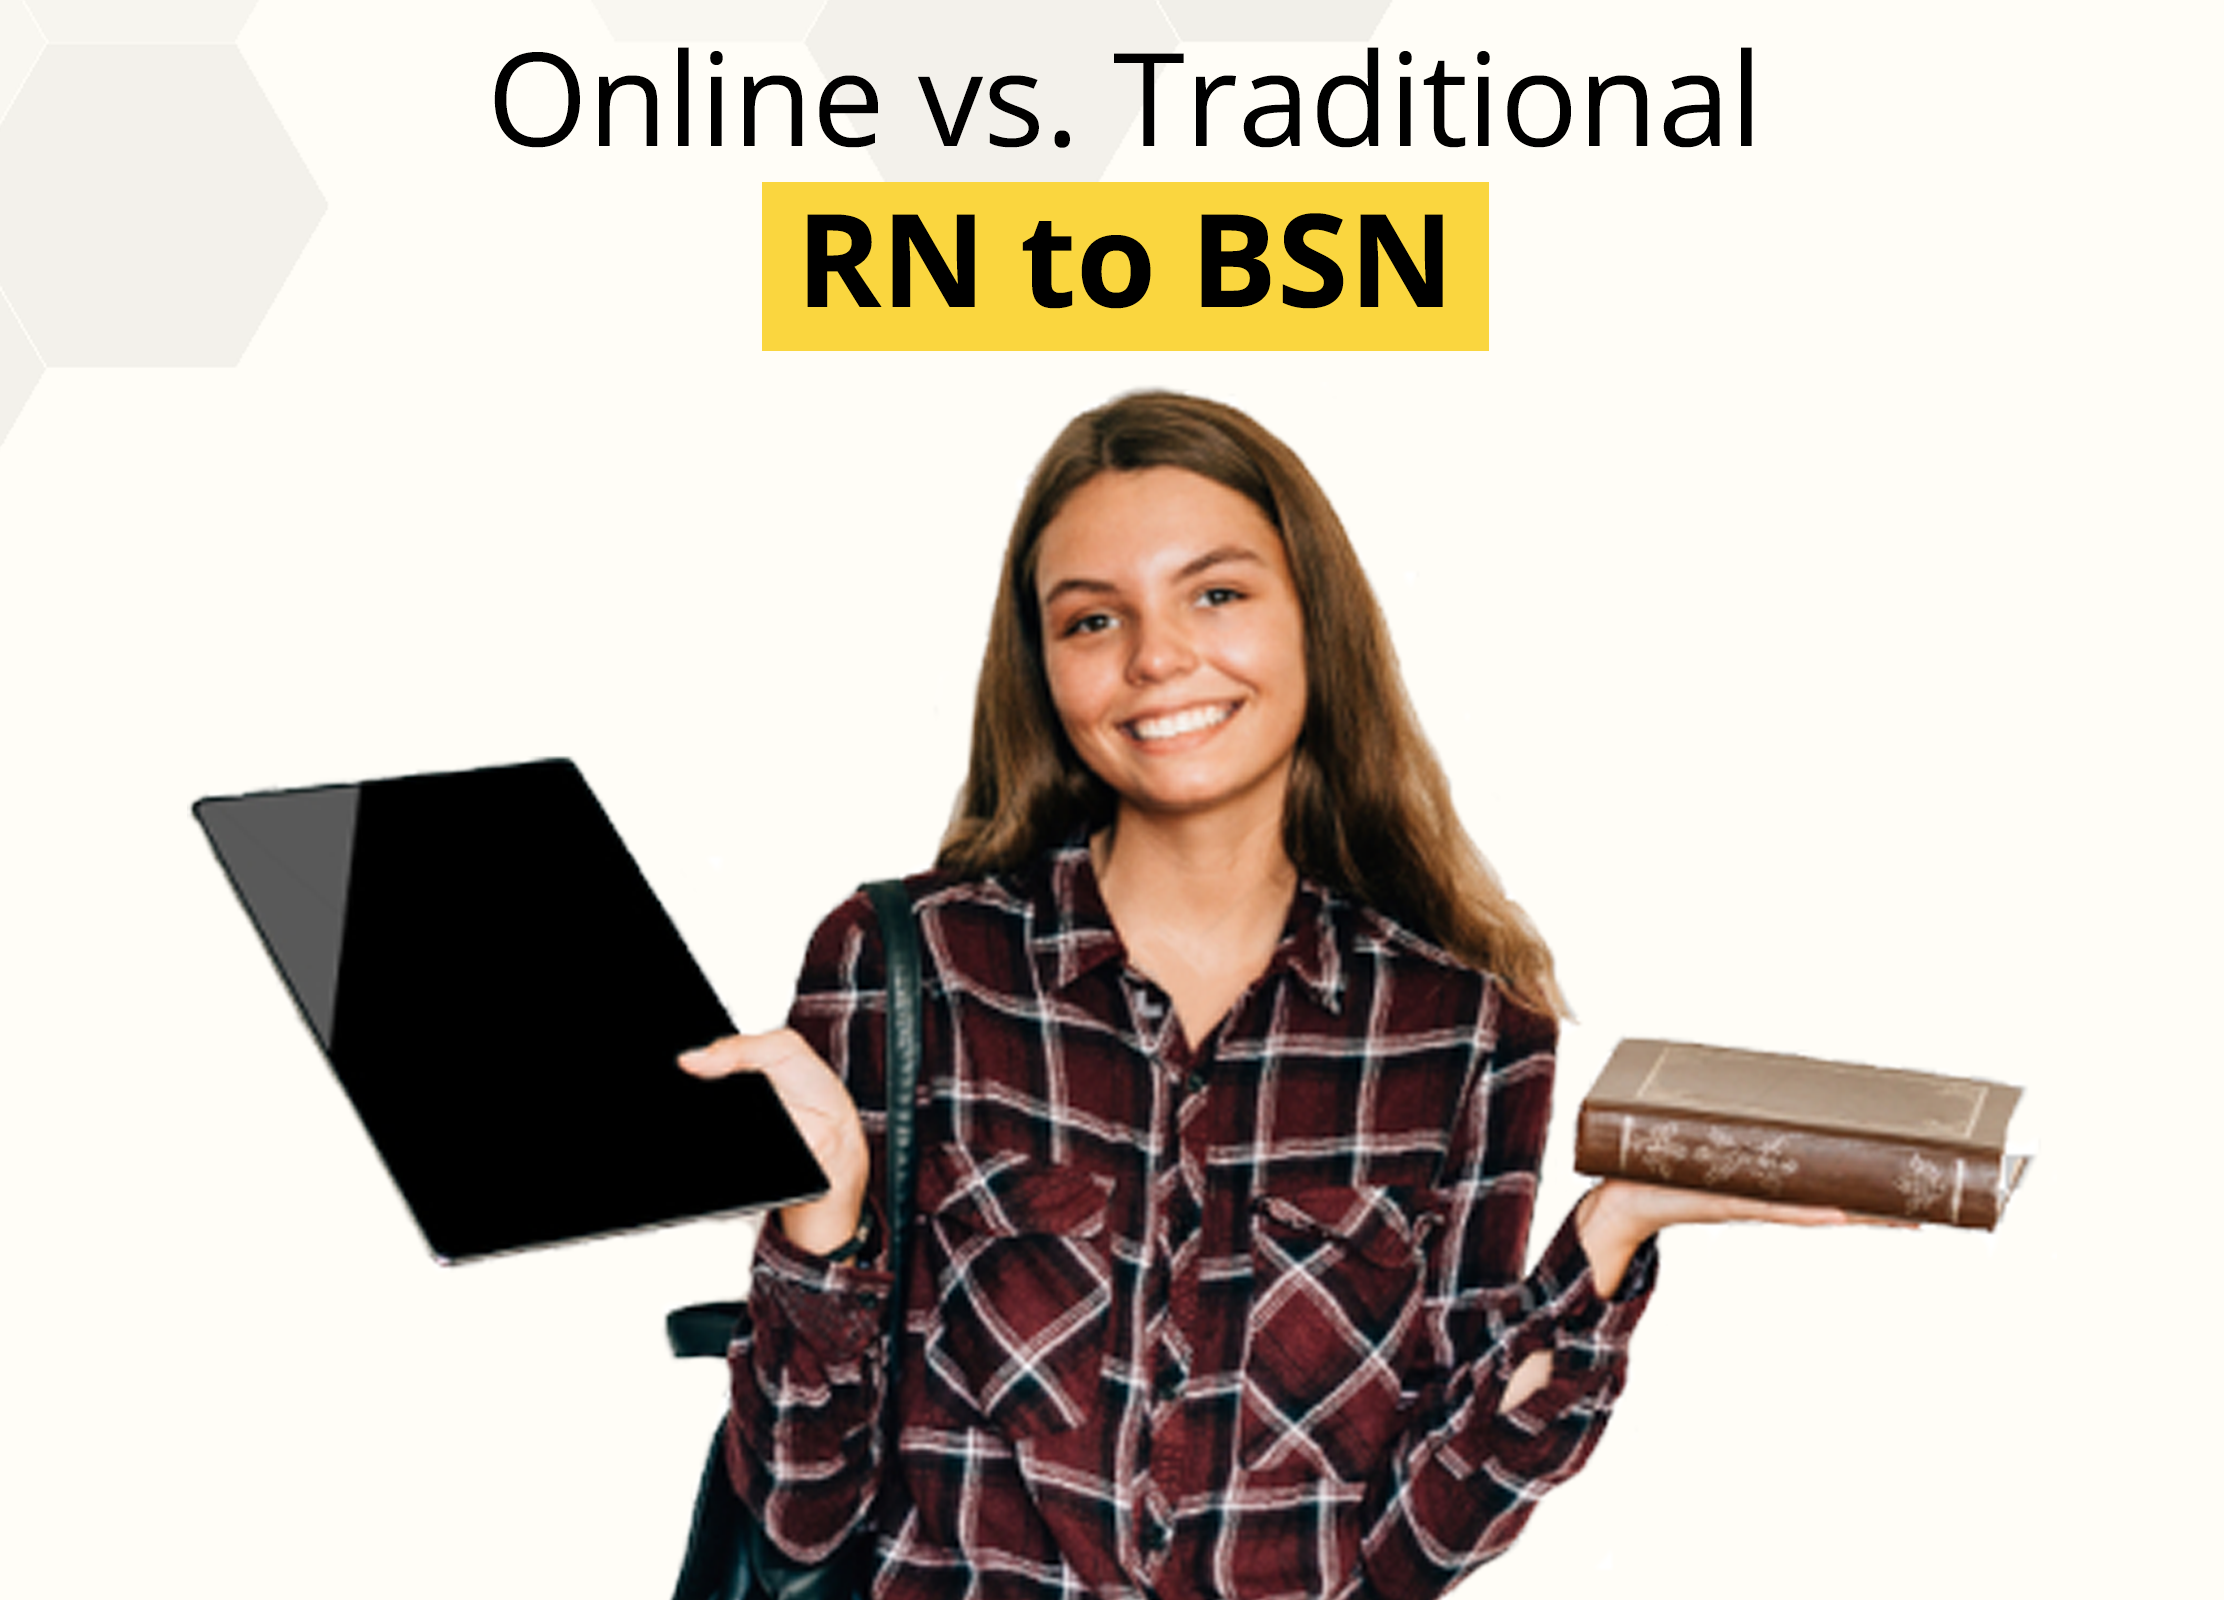 Online vs Traditional RN to BSN